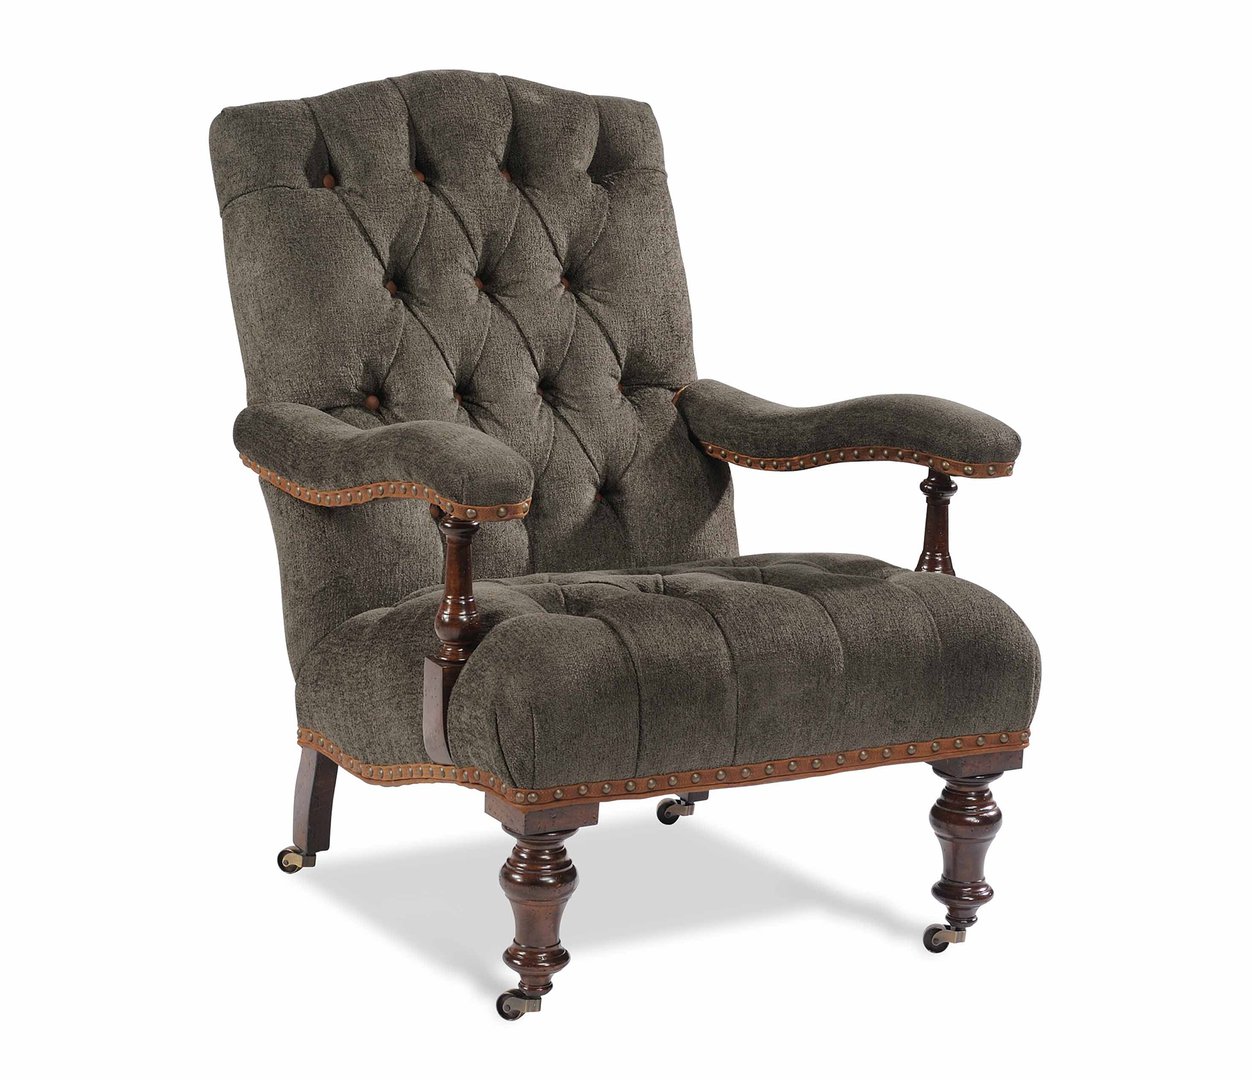 Finley Chair Image